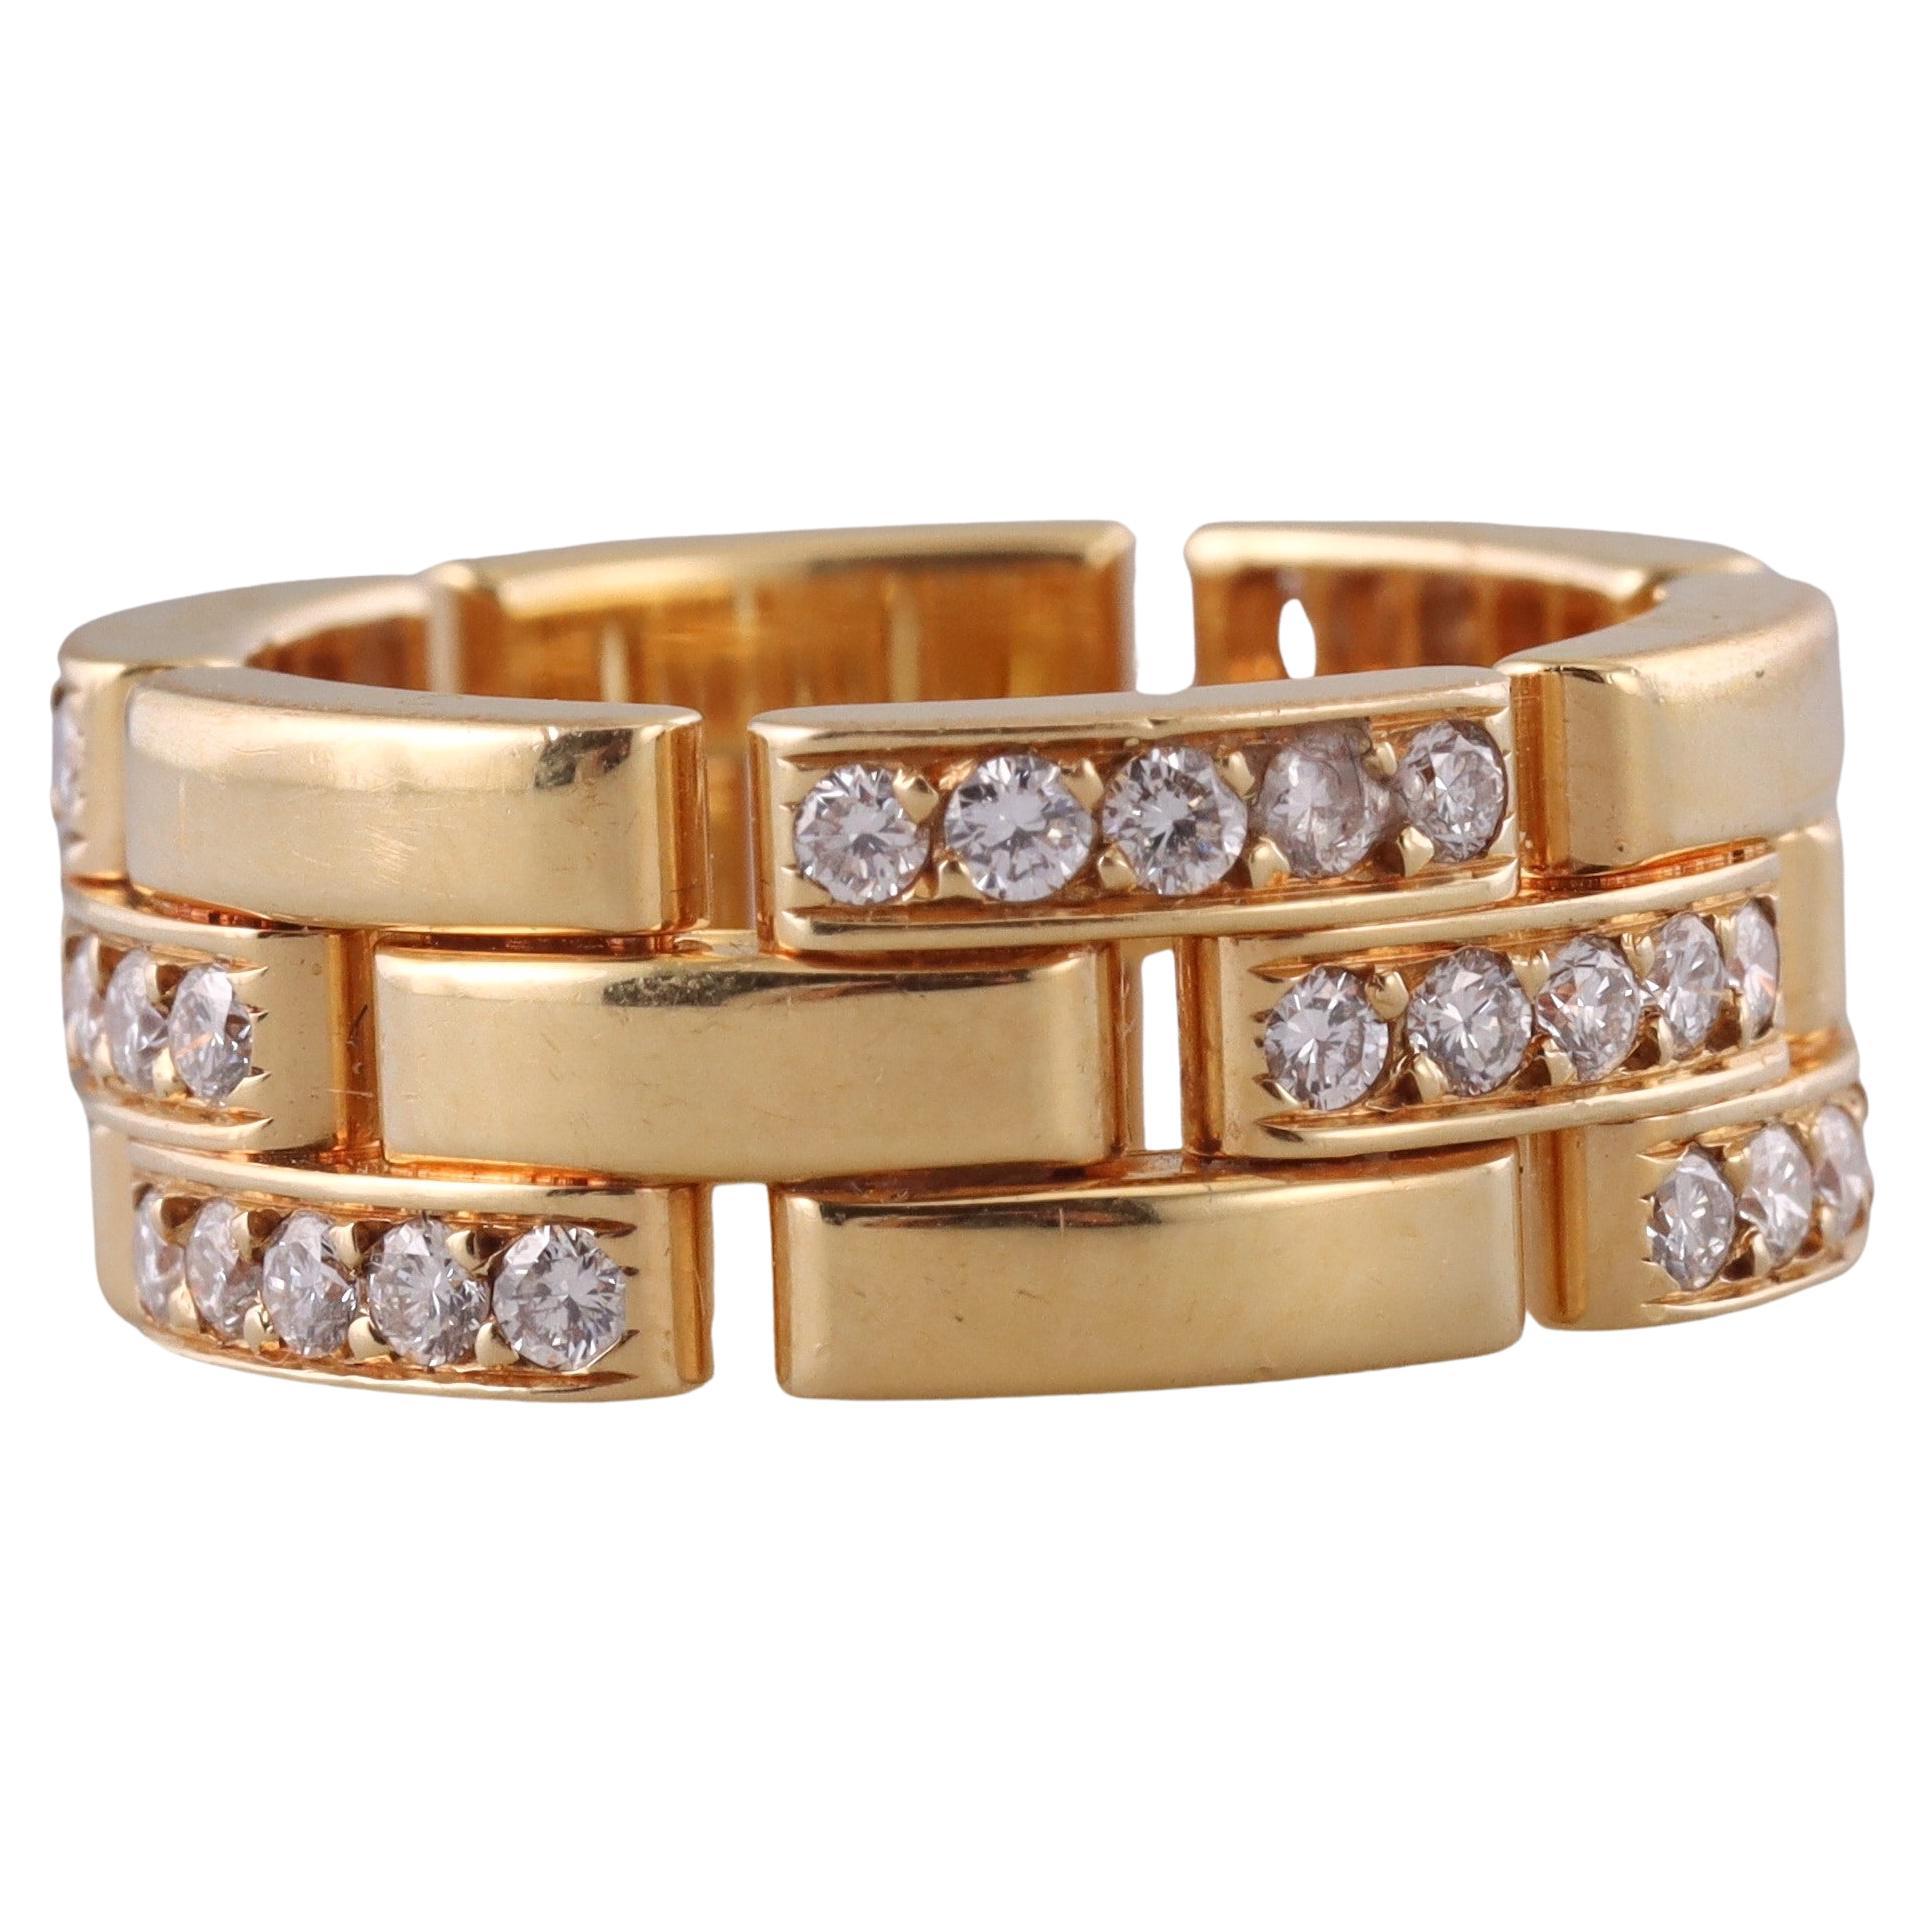 Cartier Maillon Panthere Gold Diamond Band Ring